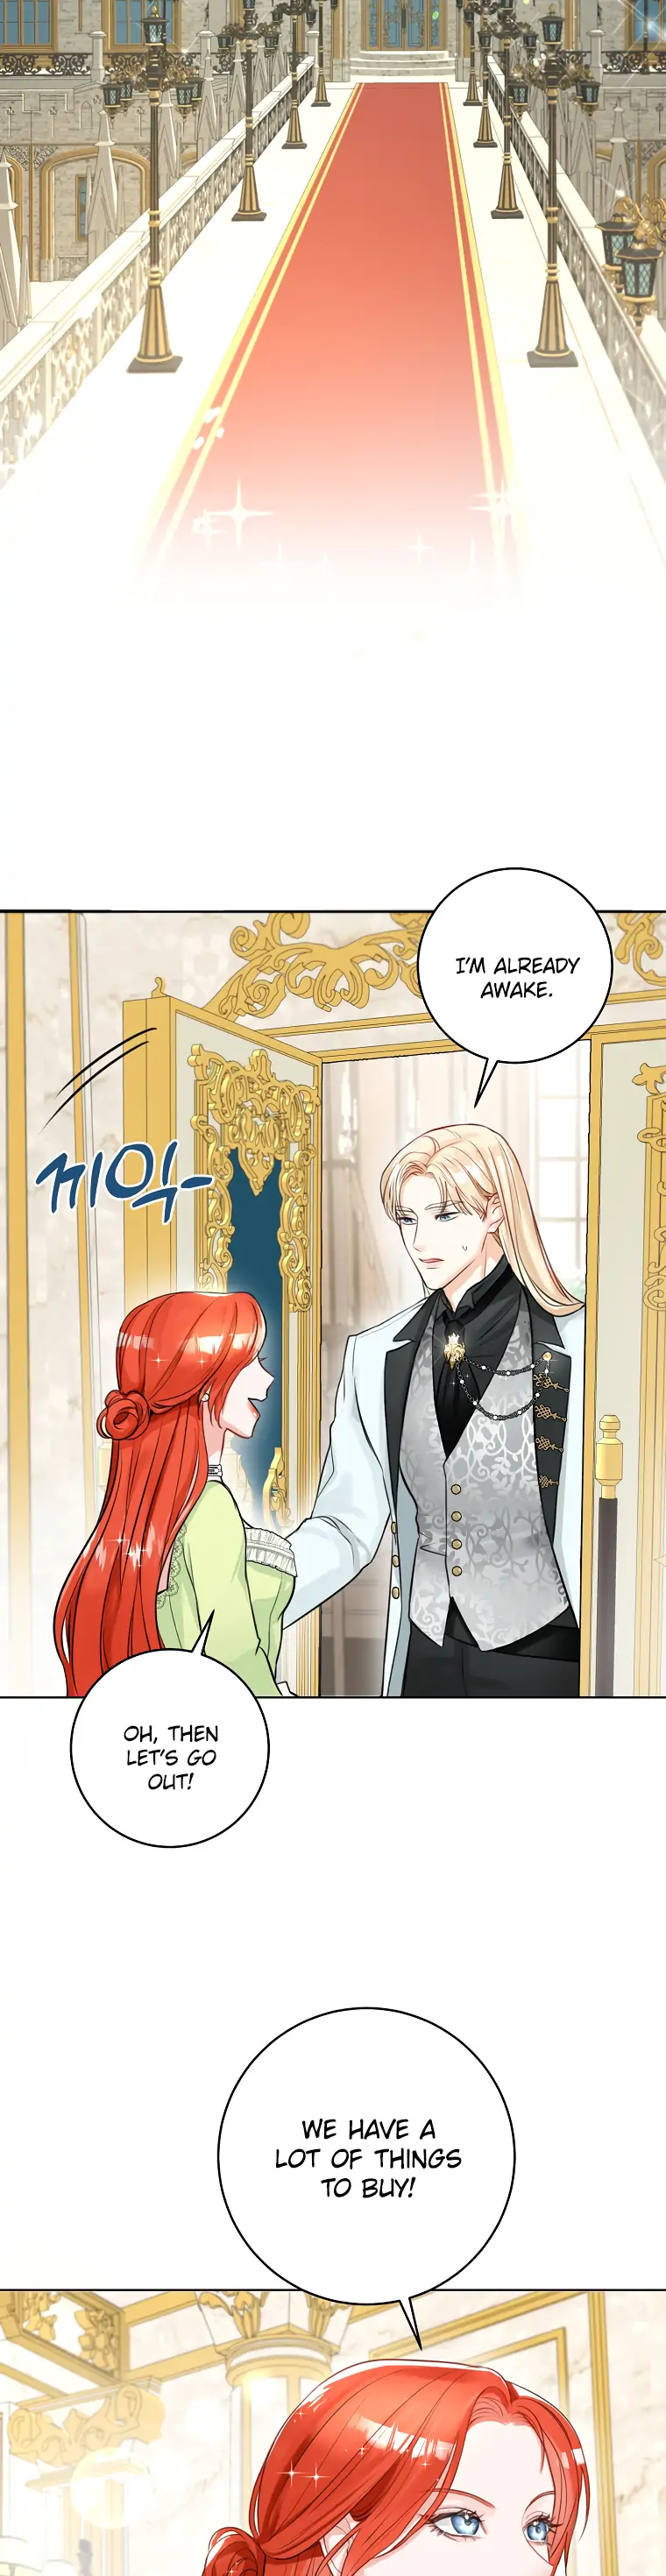 The Archduke’s Gorgeous Wedding Was a Fraud chapter 6